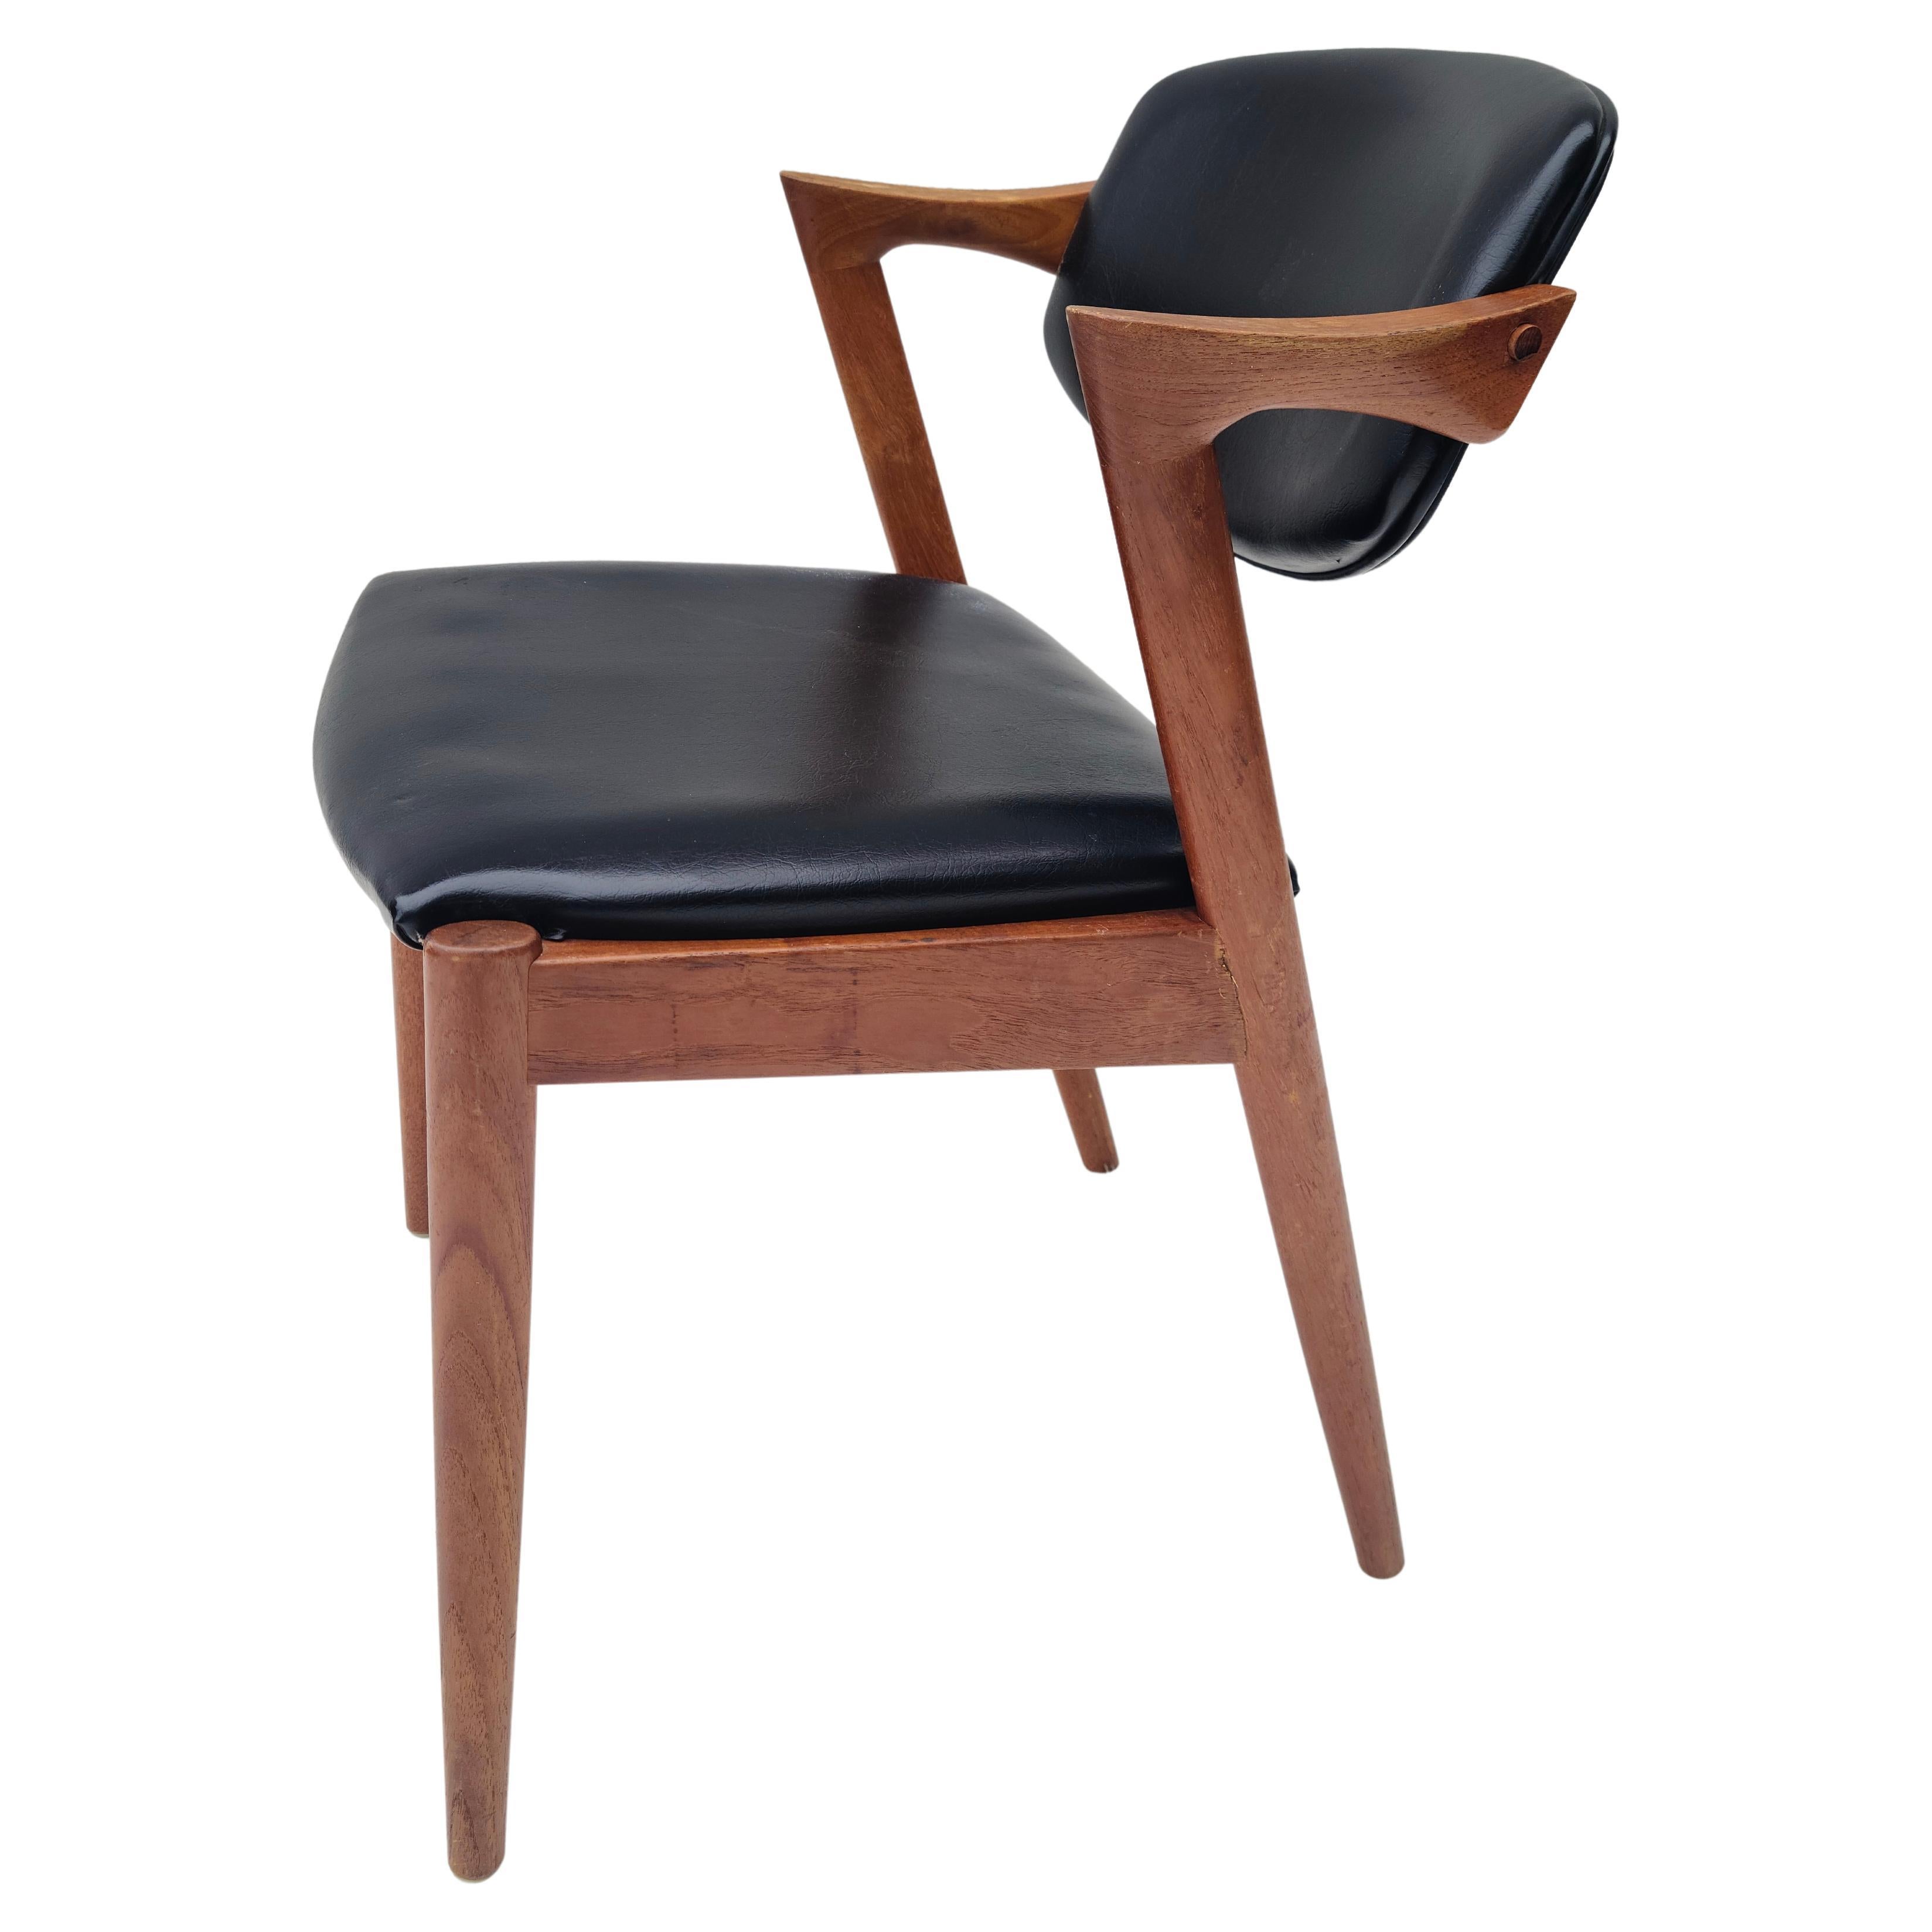 Please feel free to reach out for accurate shipping to your location.

Dining chair by Kai Kristiansen.
Sculpted Teak construction.
Made in Denmark